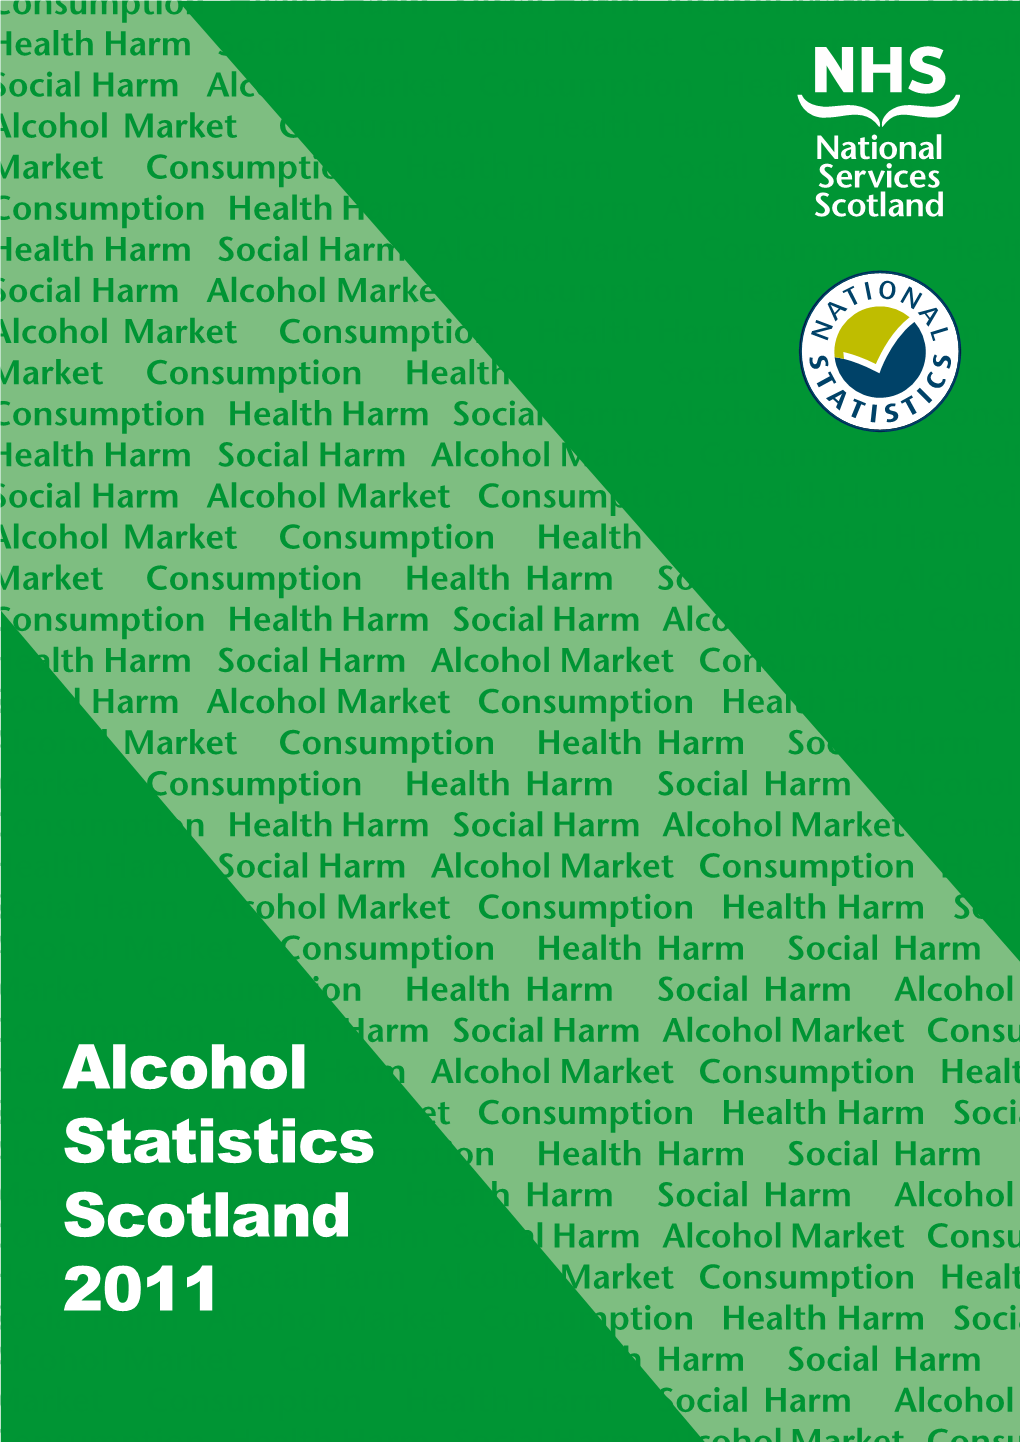 Alcohol Statistics Scotland 2011 — I Appendix 3 ICD10 Codes Used for Reporting Alcohol-Related Discharges from Scottish Hospitals